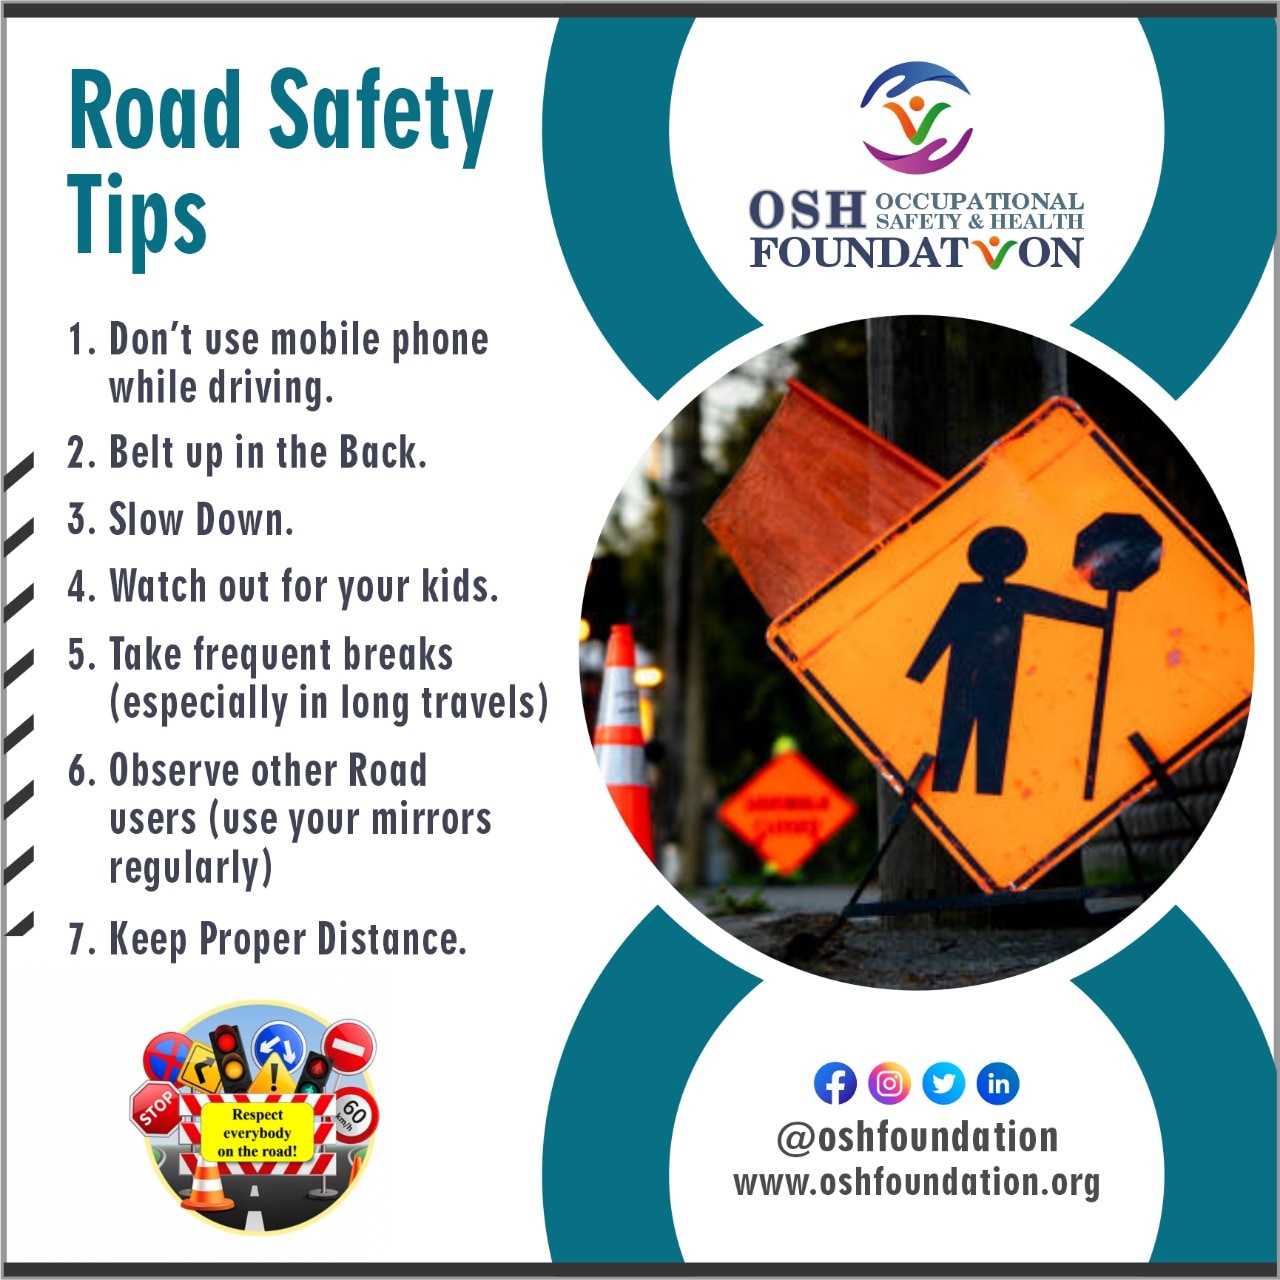 Road Safety Rule 2 #roadsafetyrules #roadsafety